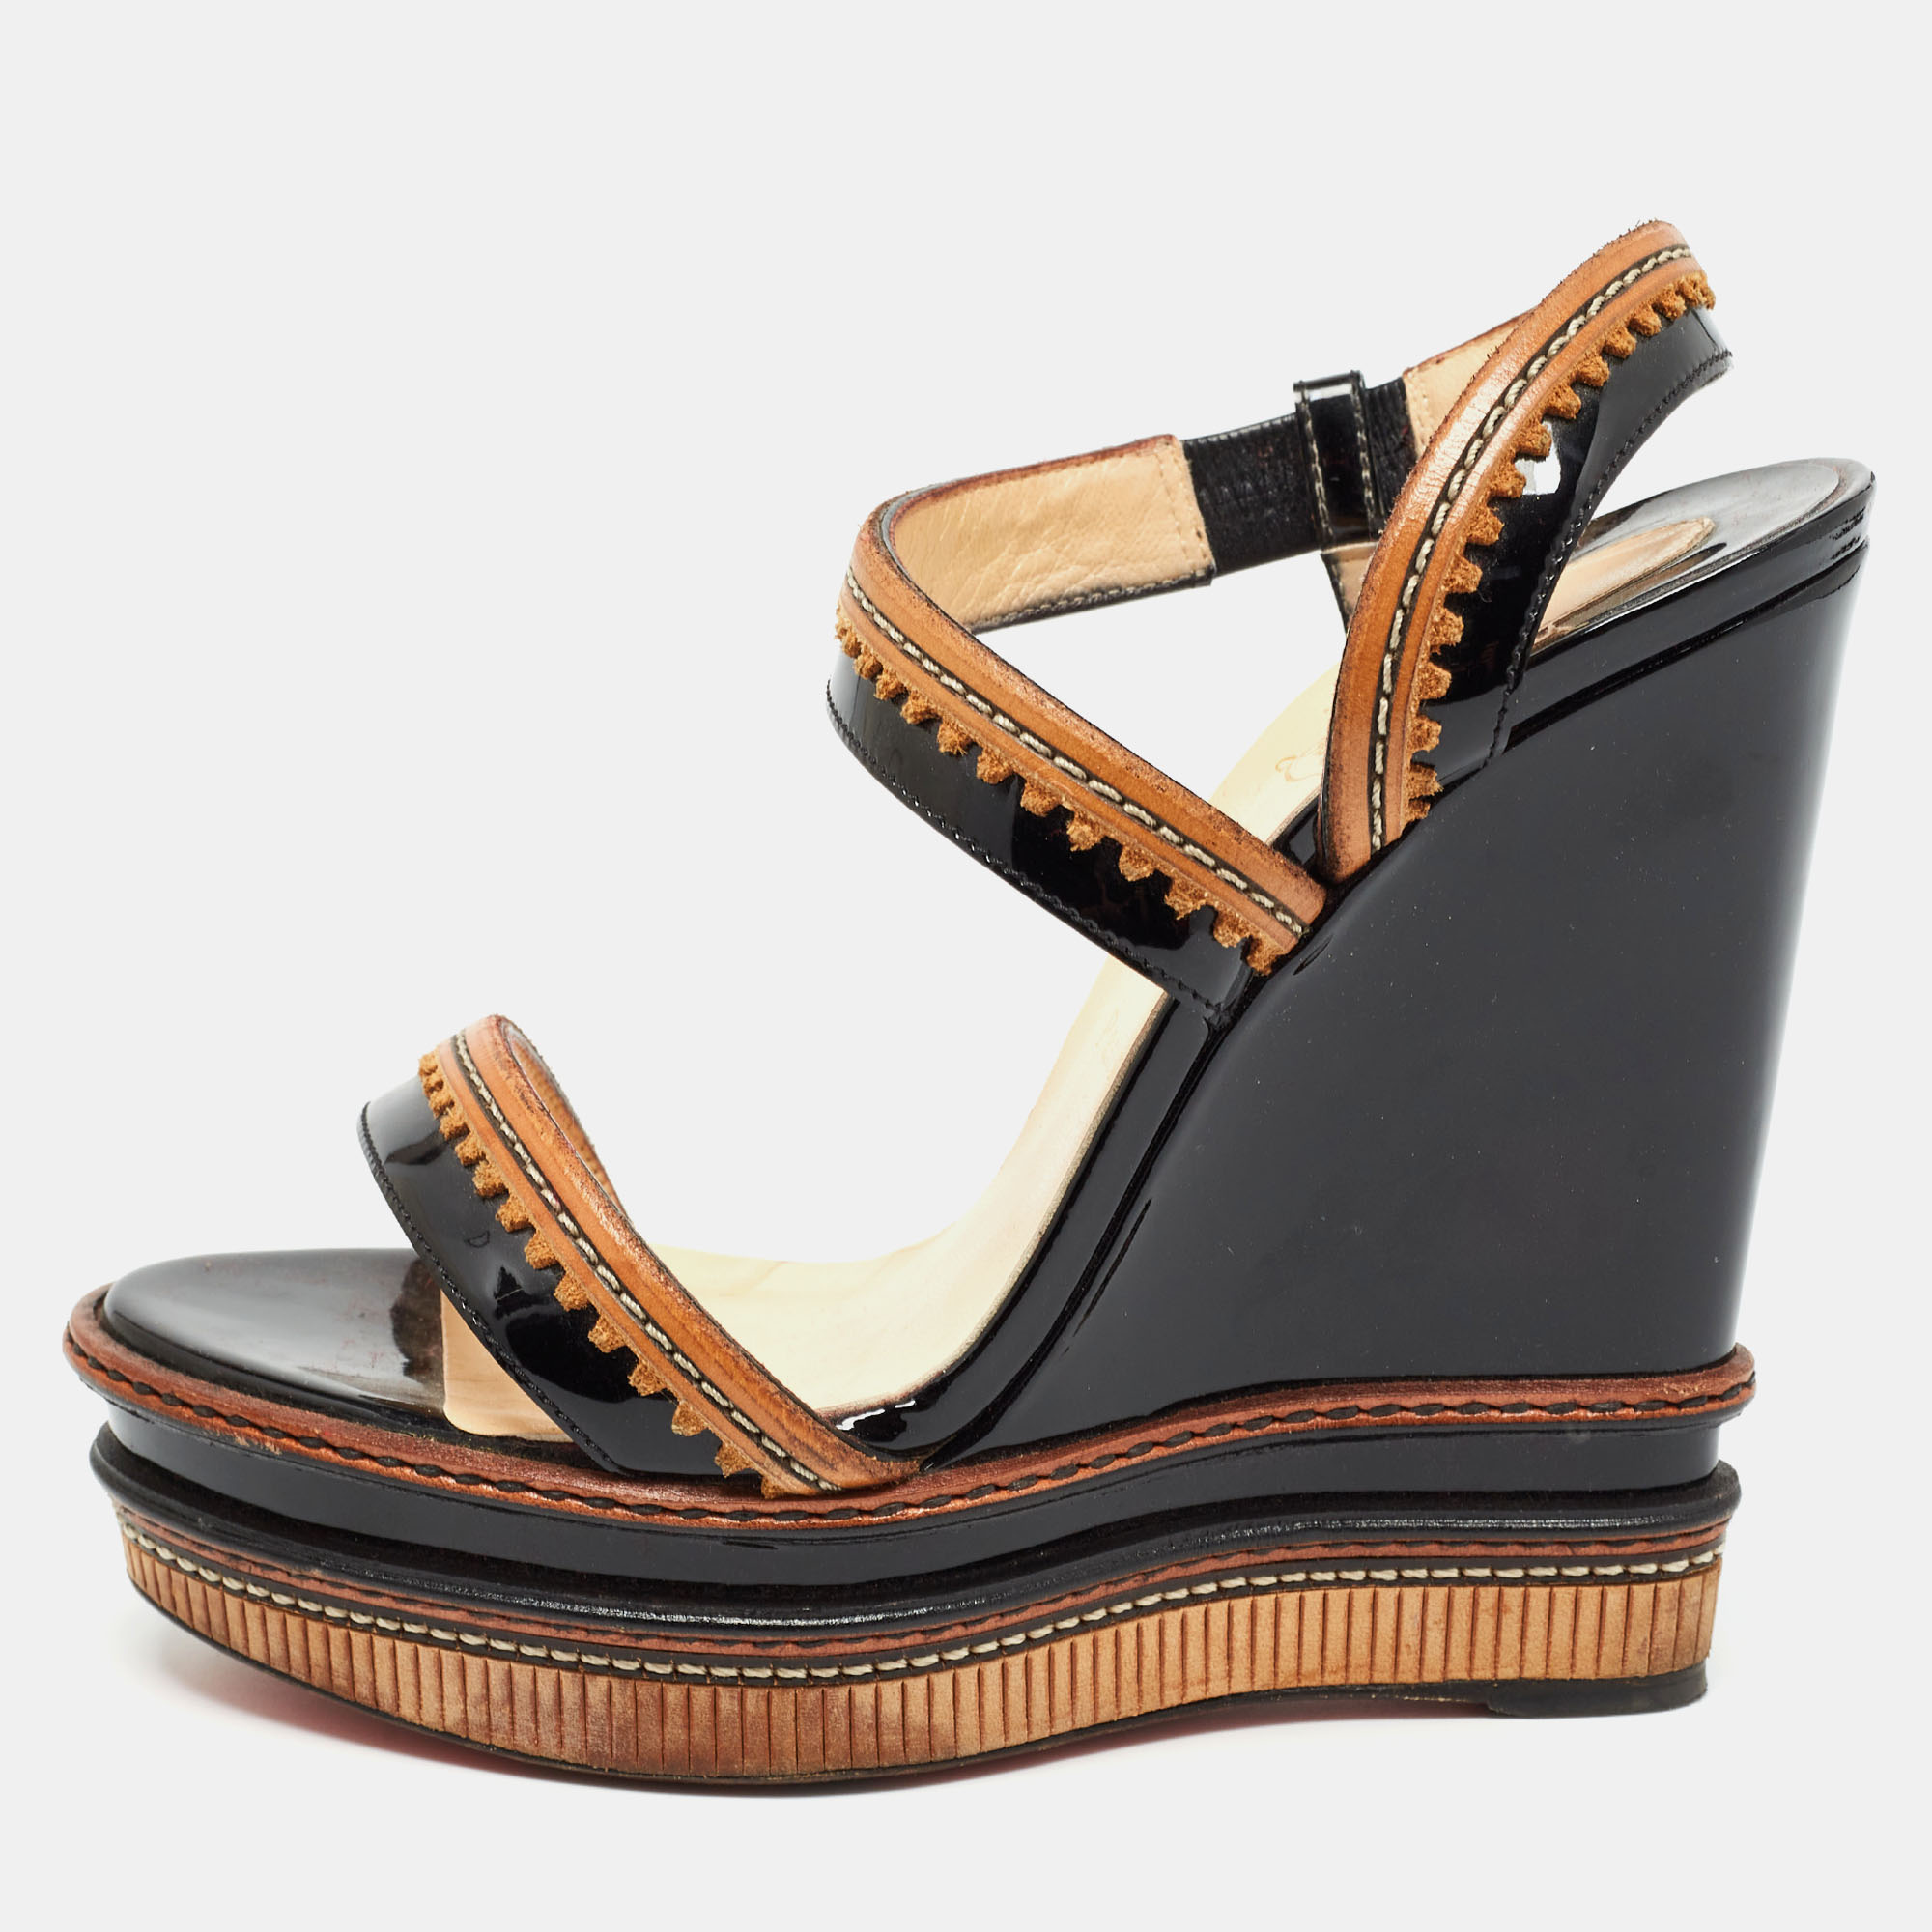 Christian louboutin black/brown patent and leather trepi wedge sandals size 40